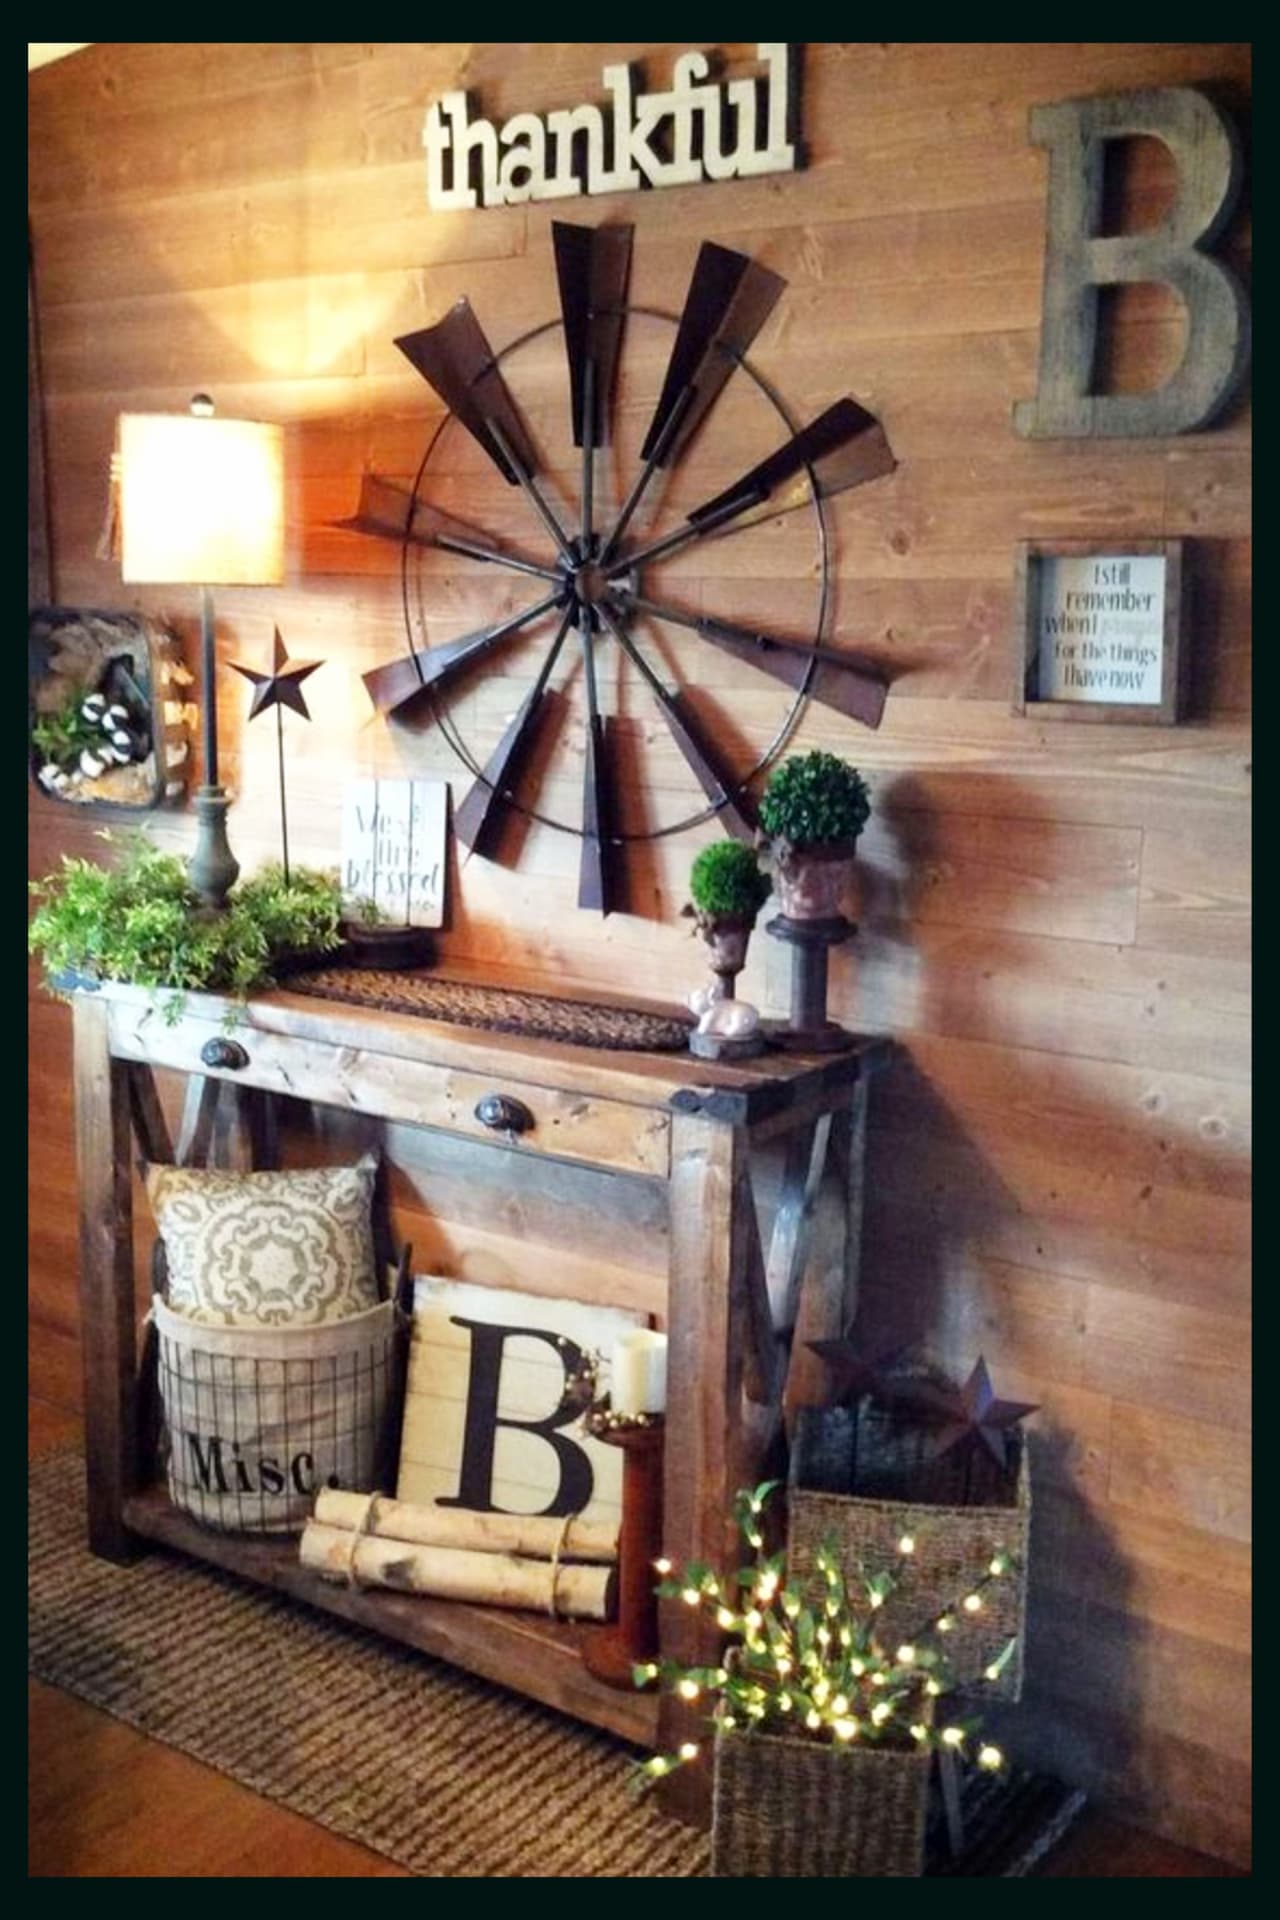 foyer accent wall ideas and hallway wall decor ideas I LOVE - DIY decorating in farmhouse style! Love this rustic farmhouse foyer decor! The pallet wood wall and accent wall decorations and home accessories are GORGEOUS!